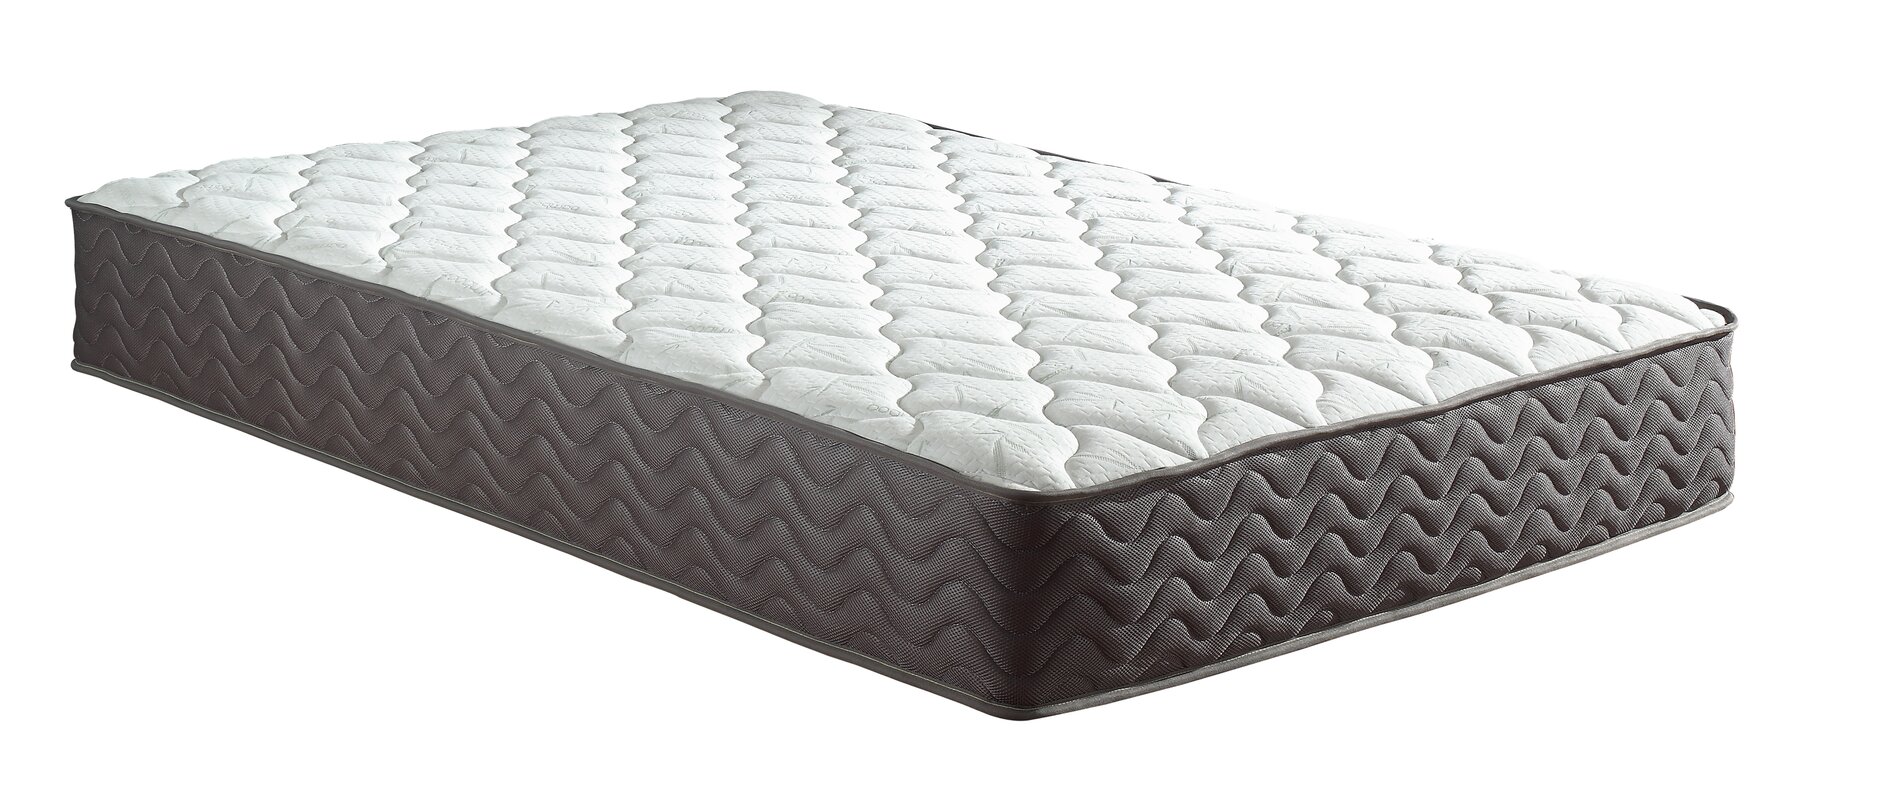 madison time square mattress review